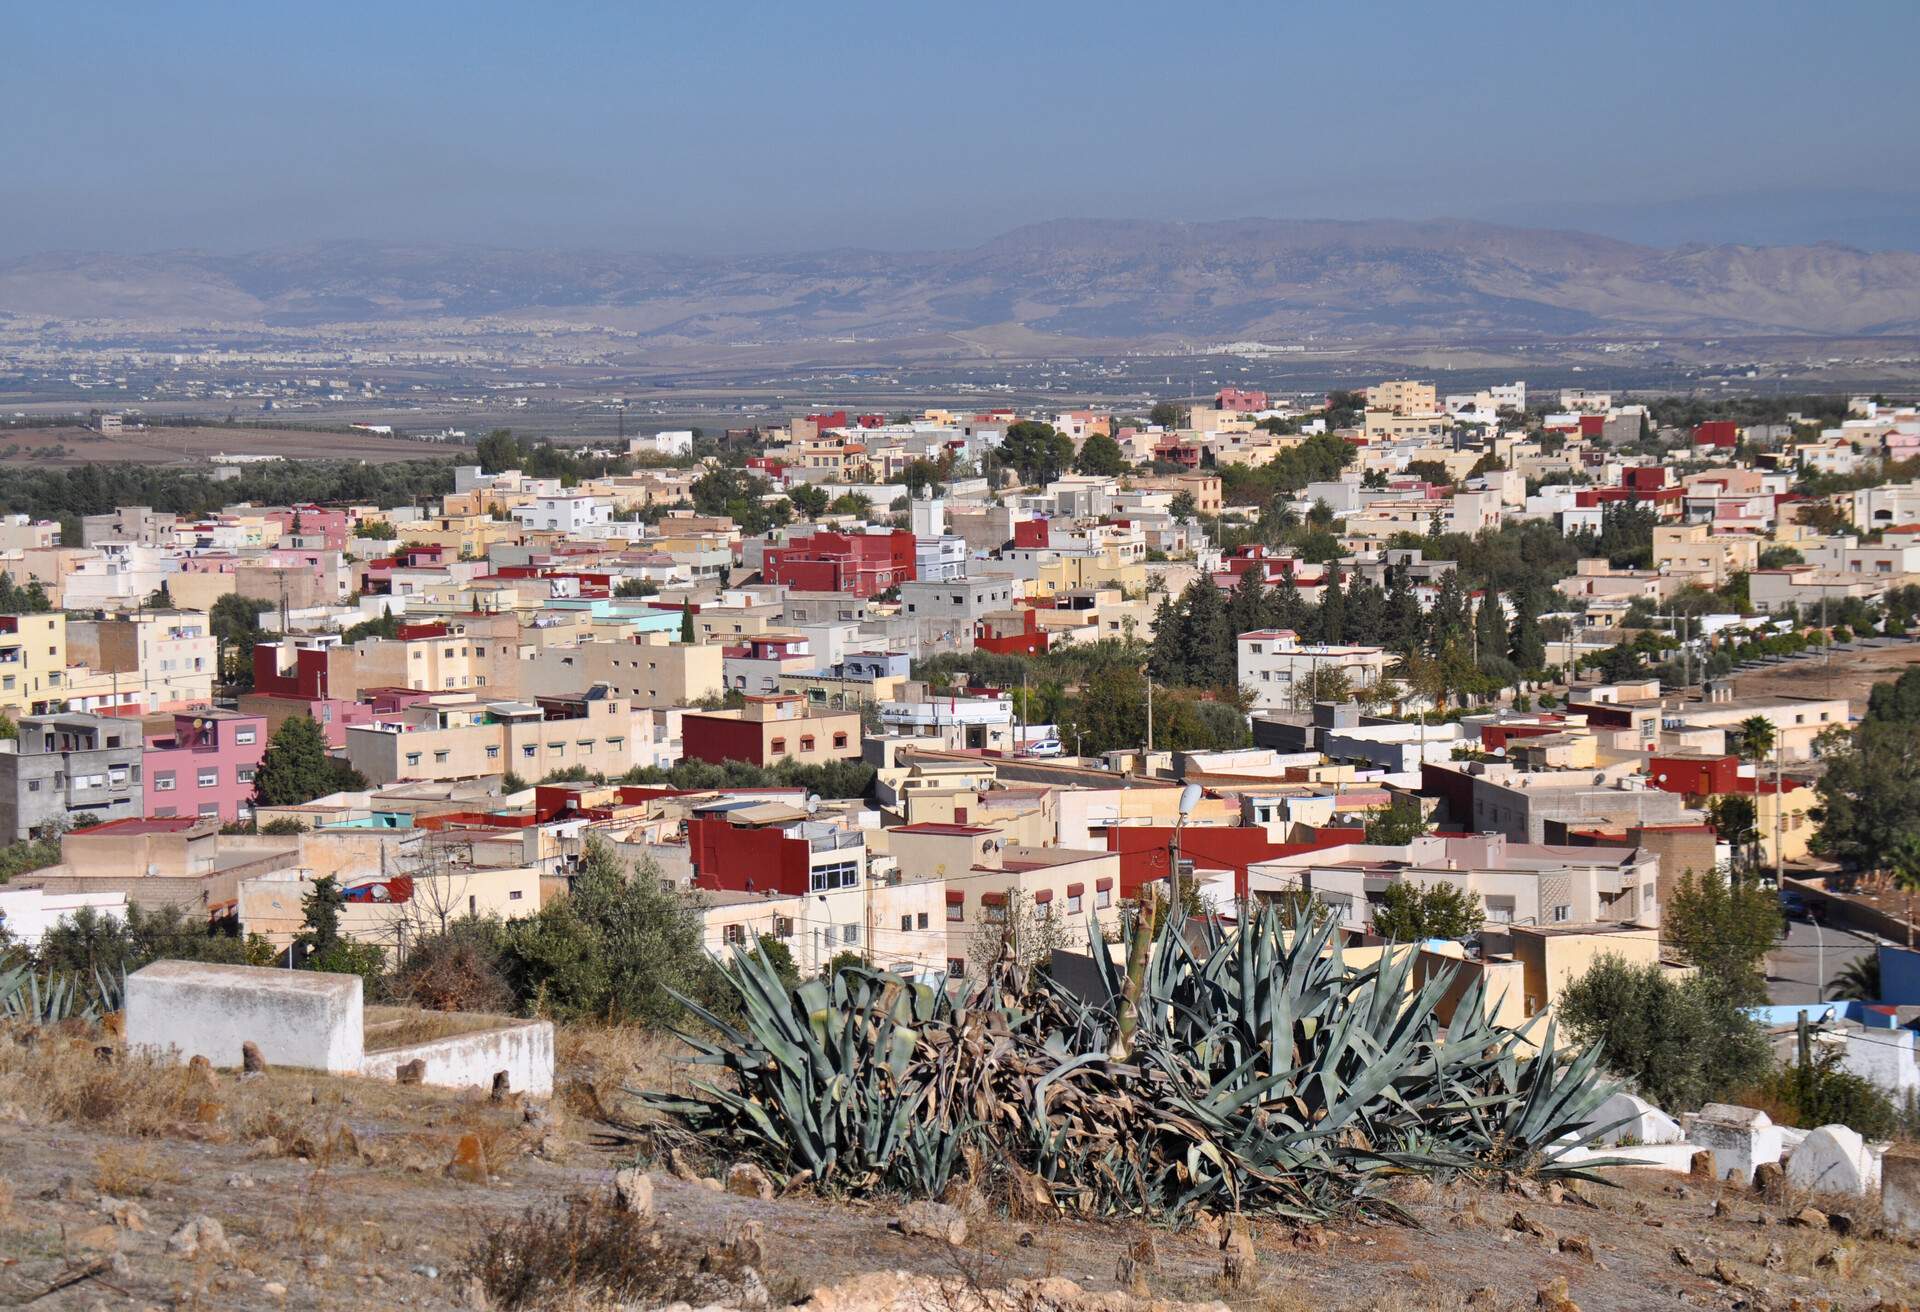 Colored houses in the Moroccan city of Sefrou (Fès-Meknès, Morocco, Maghreb). With prickly pears in the foreground and mountains in the foggy background.